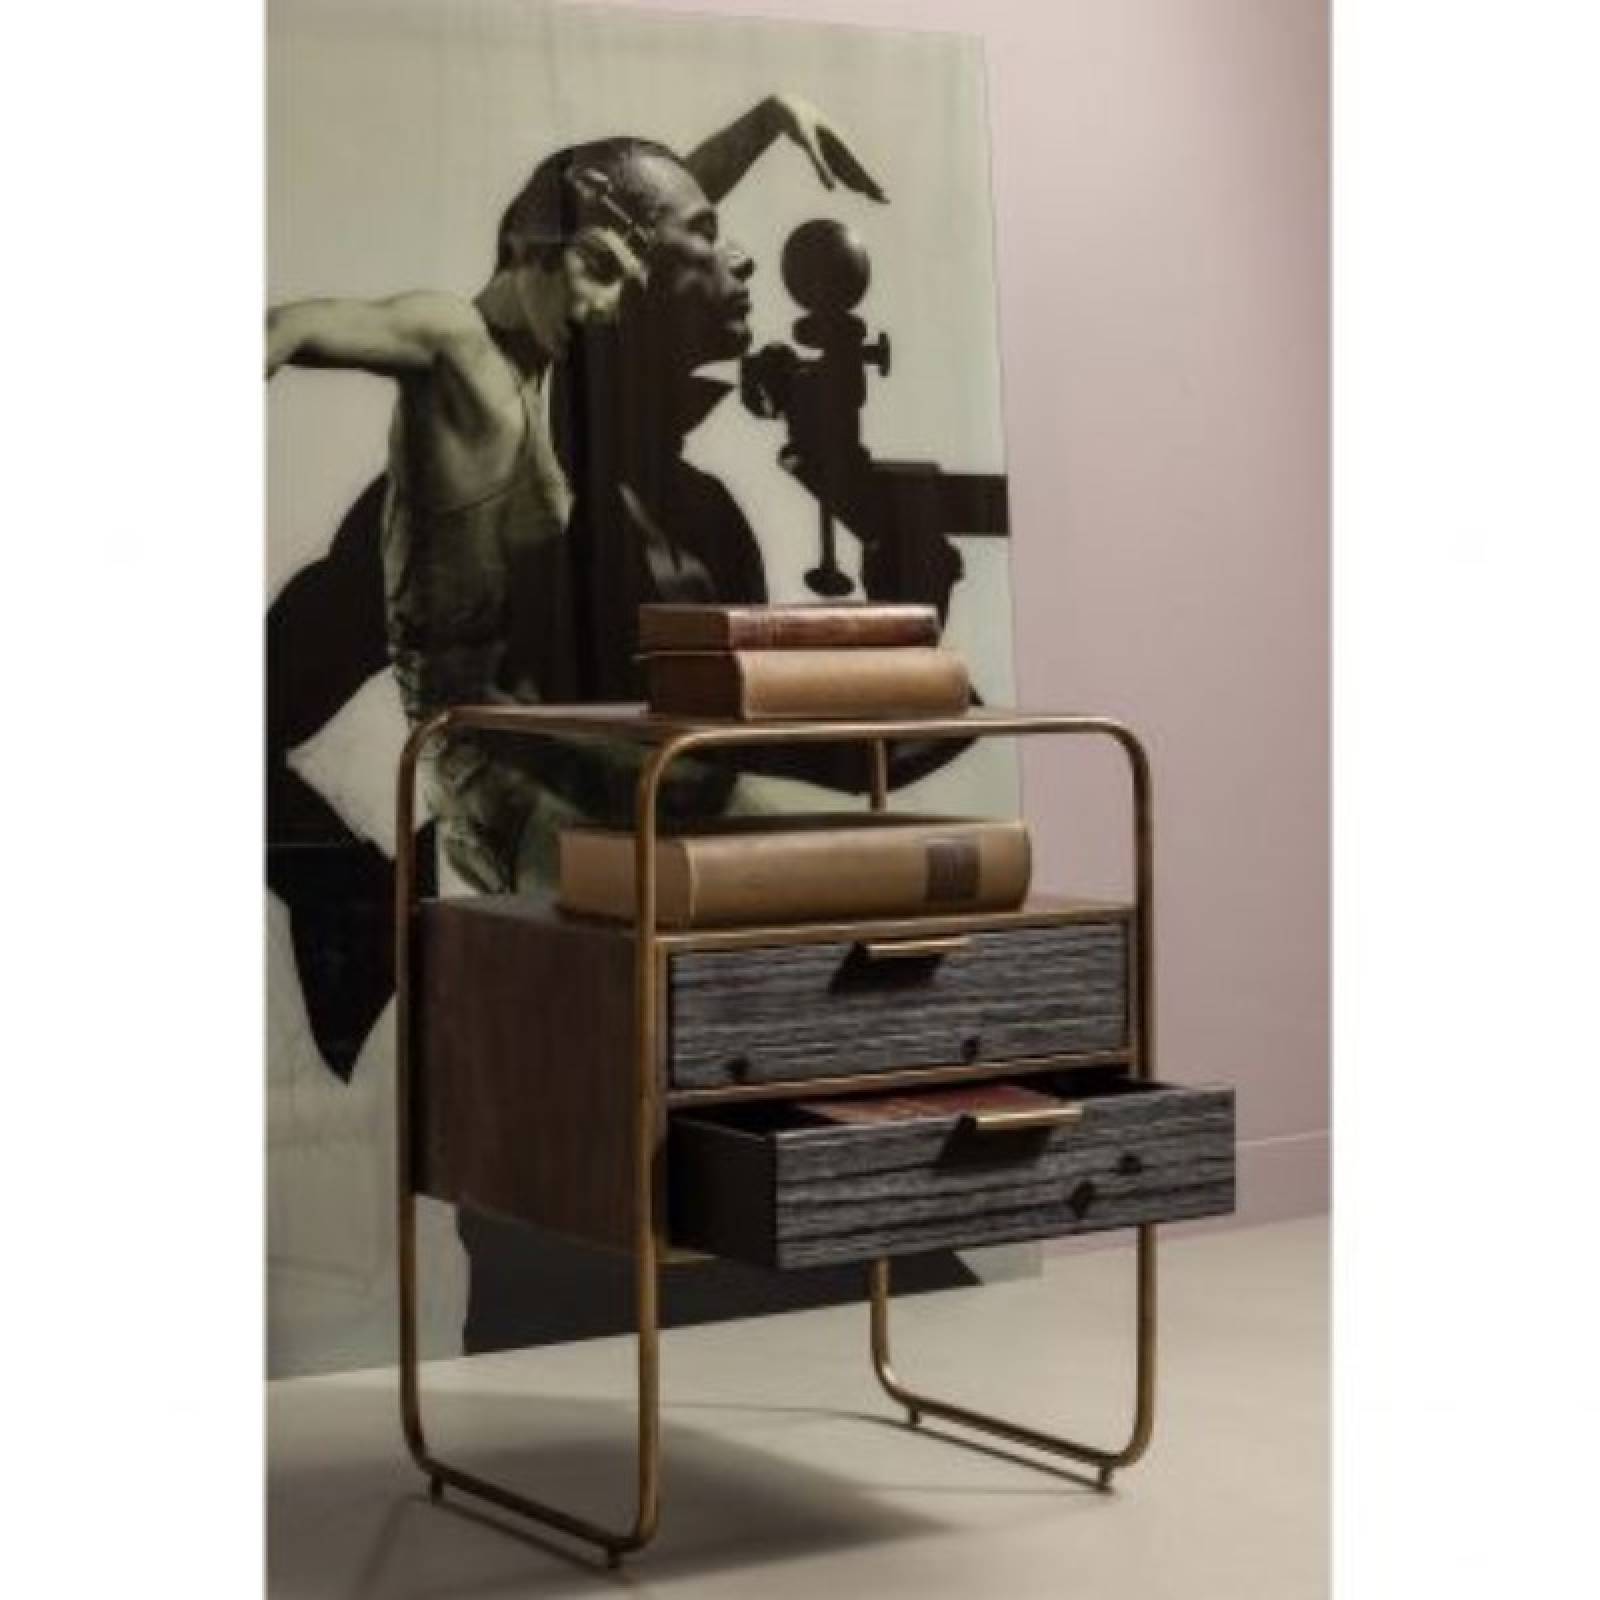 Wooden & Metal Bedside Table With 2 Drawers thumbnails